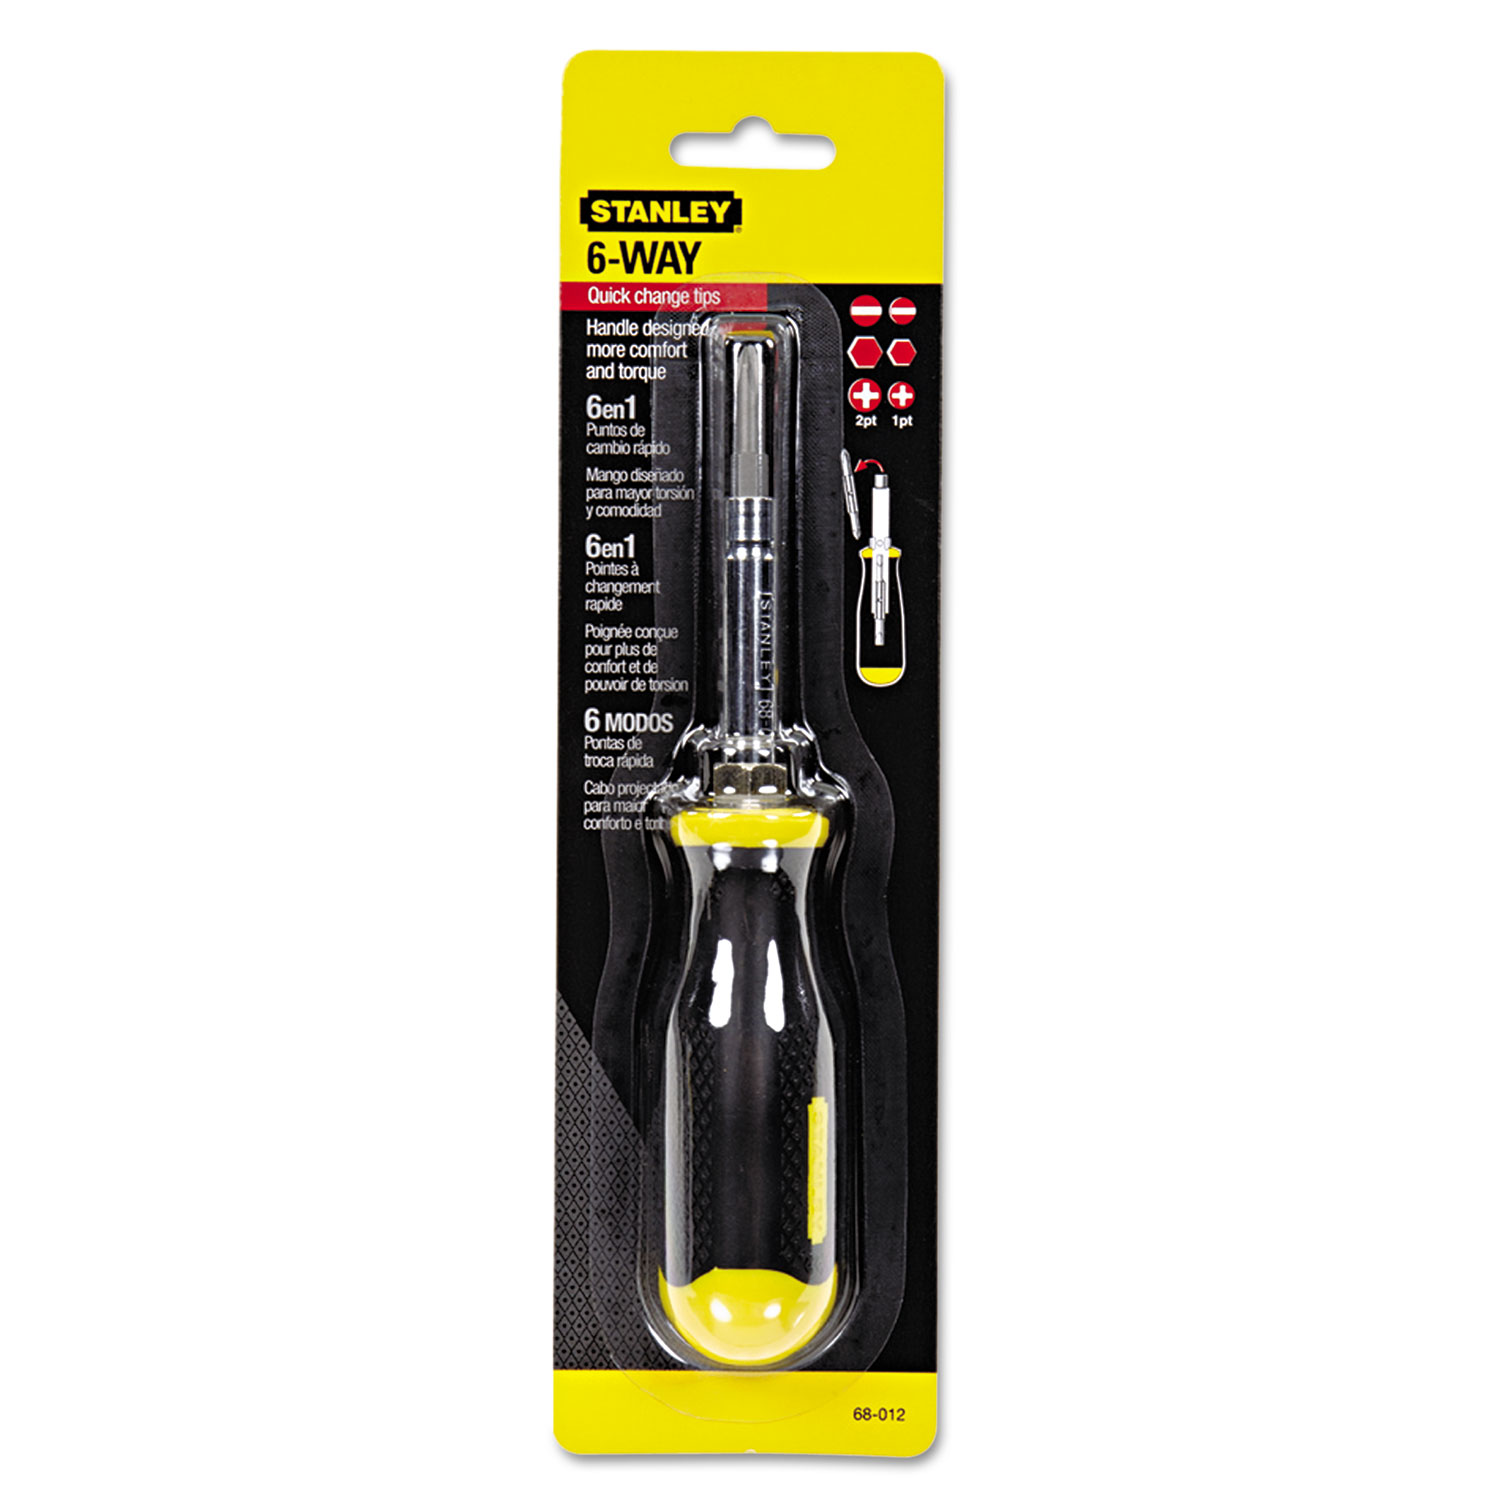  Stanley Tools 68-012 6-Way Compact Screwdriver, Cushion Grip (BOS68012) 